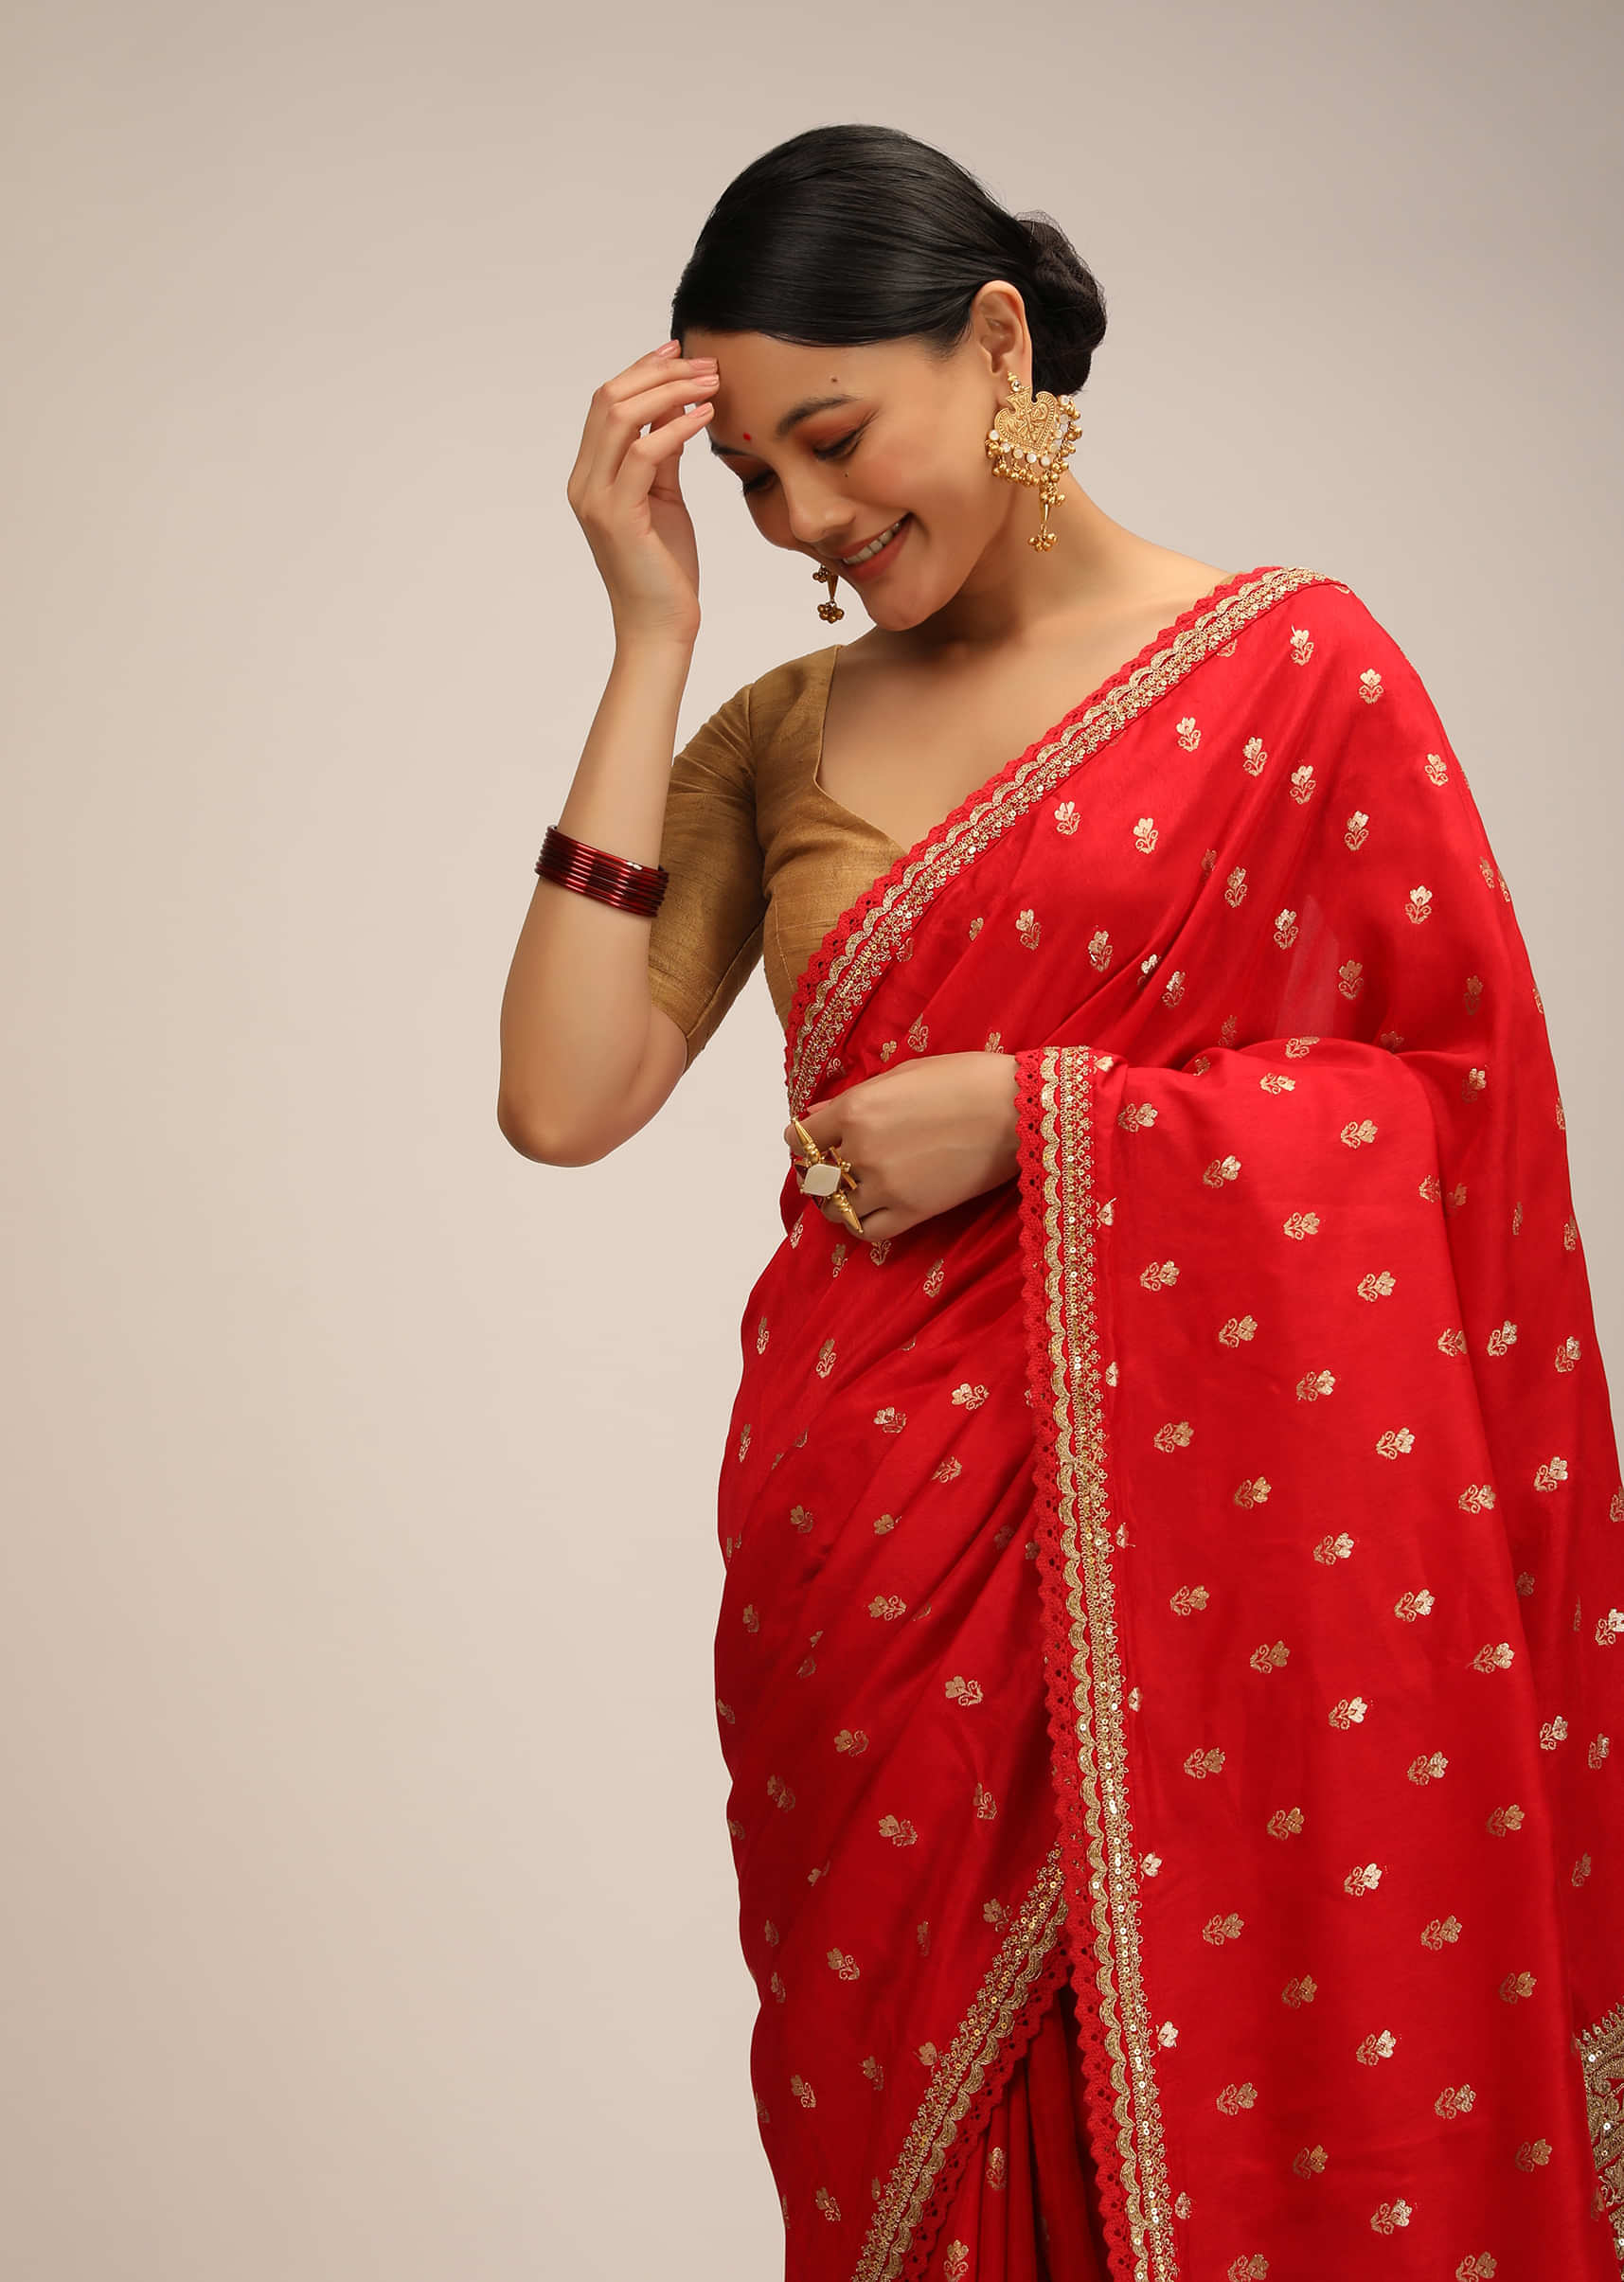 Tomato Red Saree In Dupion Silk With Woven Buttis And Zari Embroidered Palu